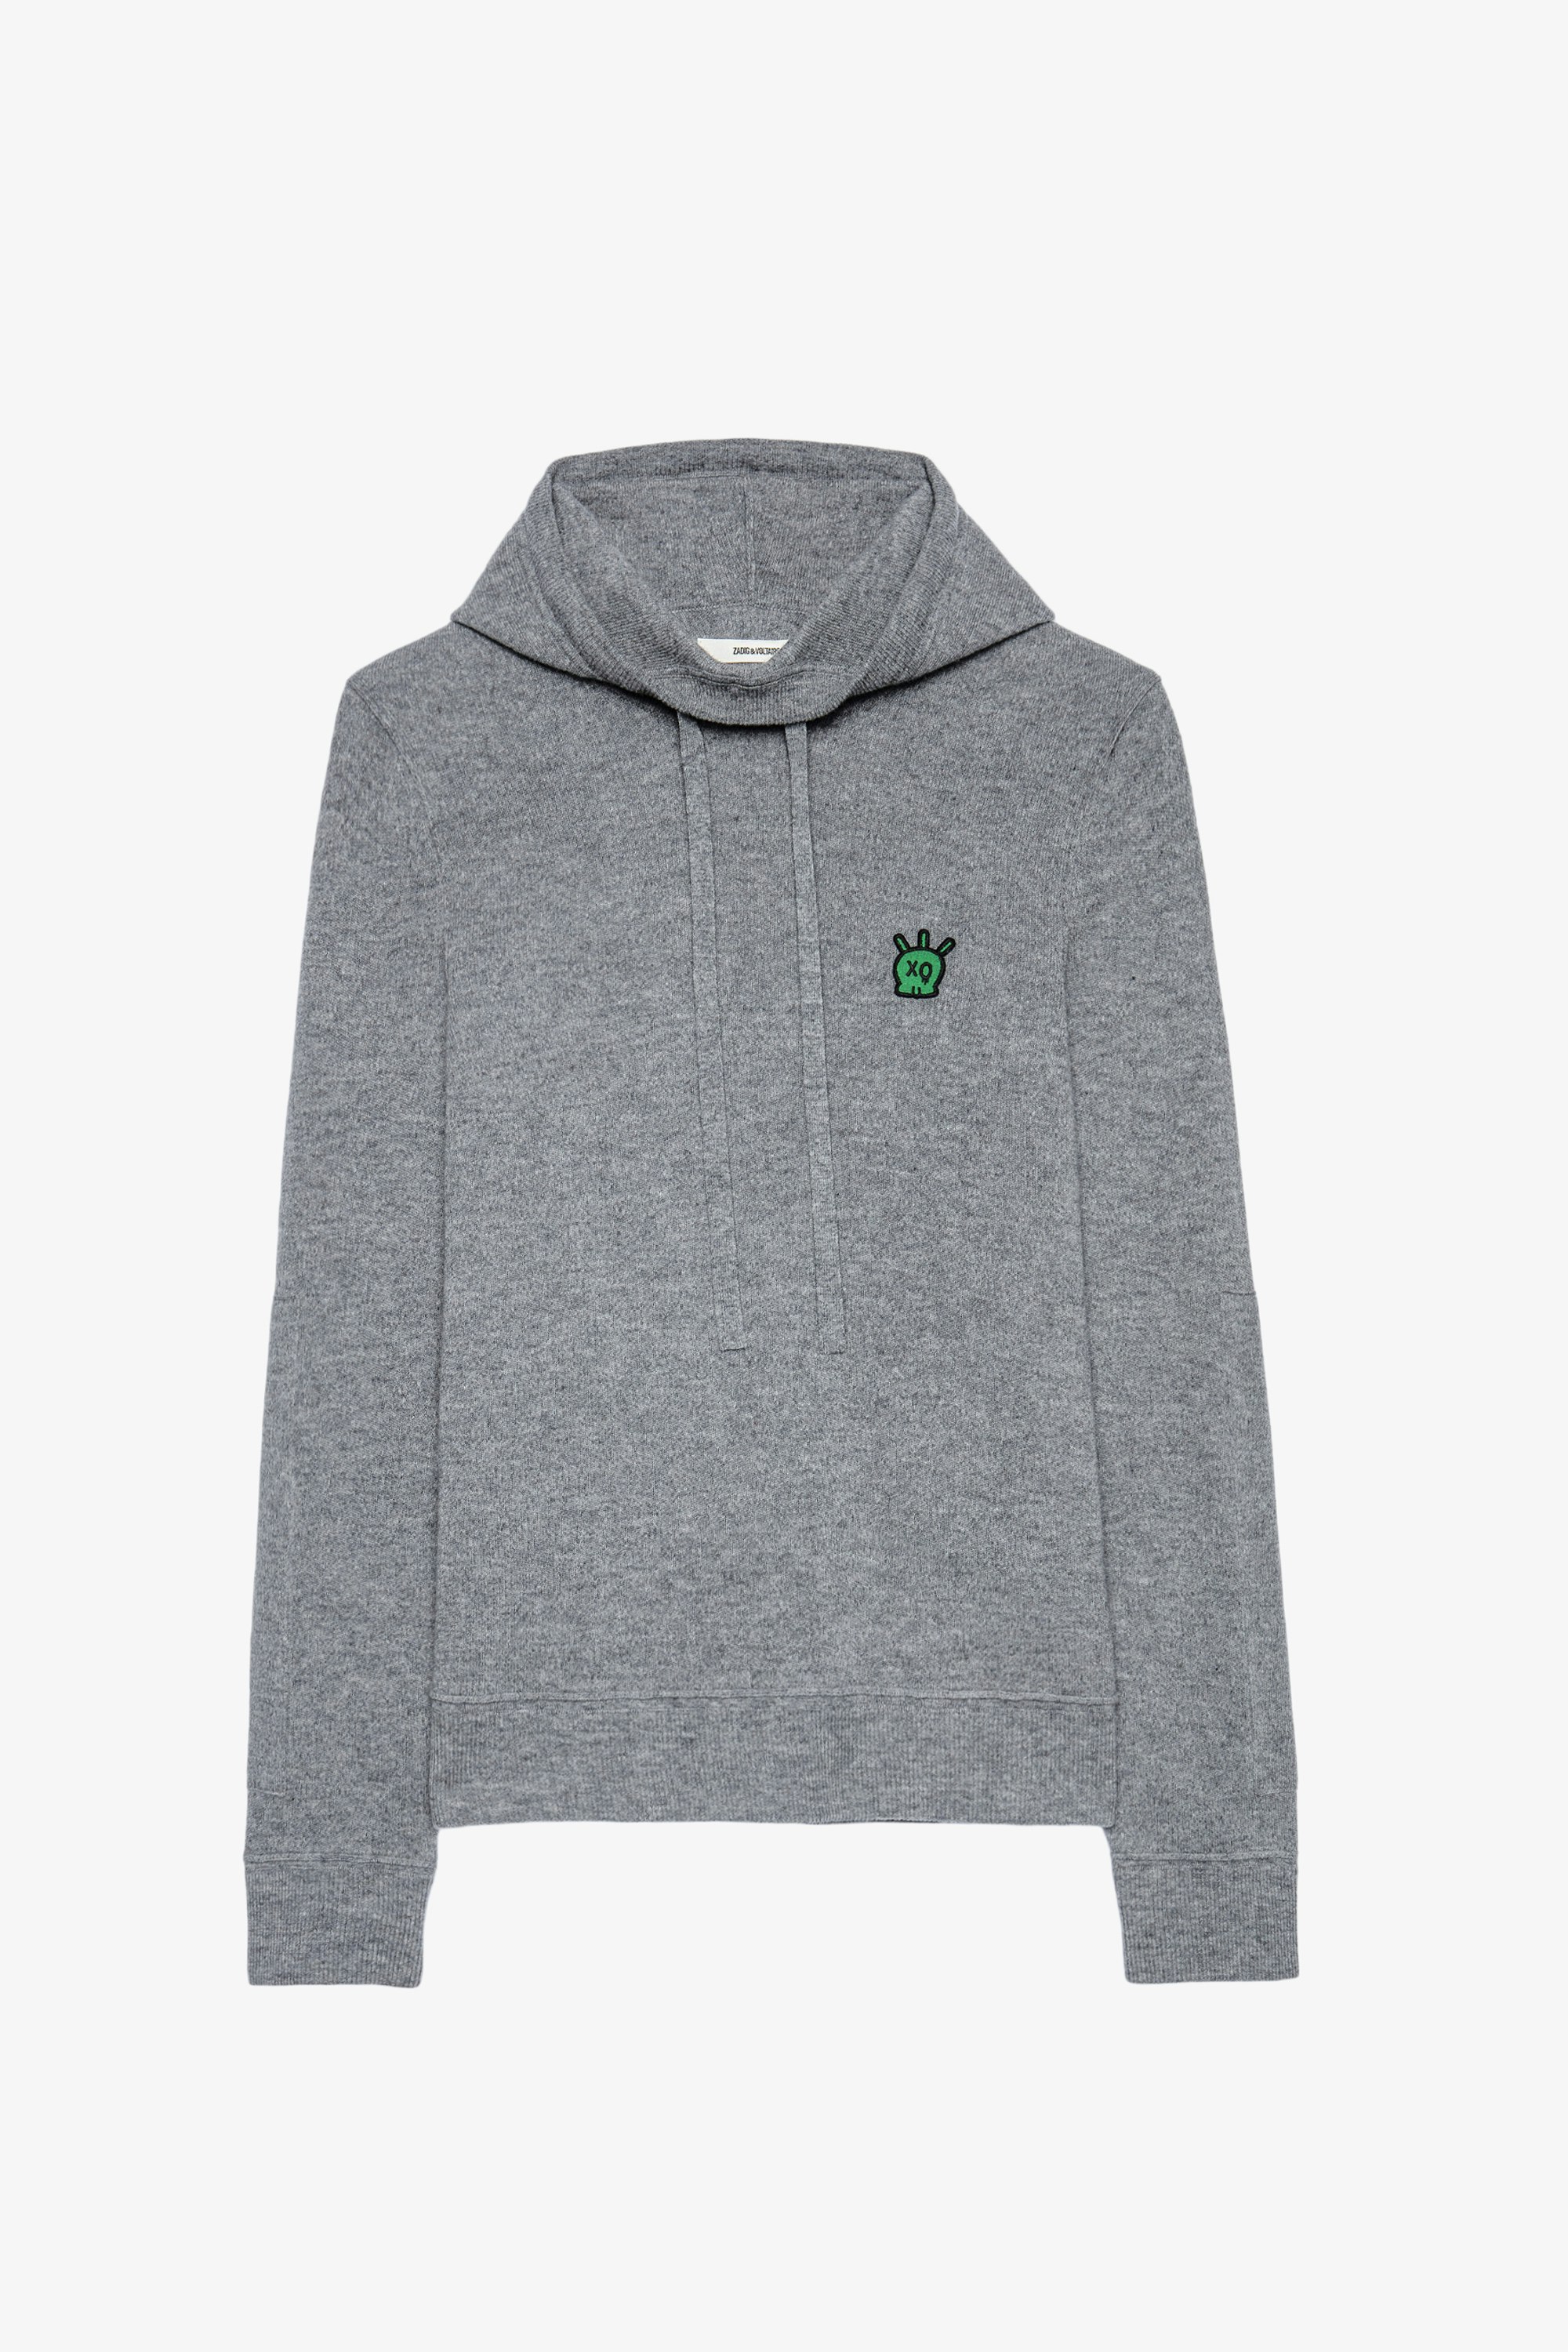 Hewitt Jumper - Men's grey merino wool hooded sweater featuring a Skull XO patch on the chest.